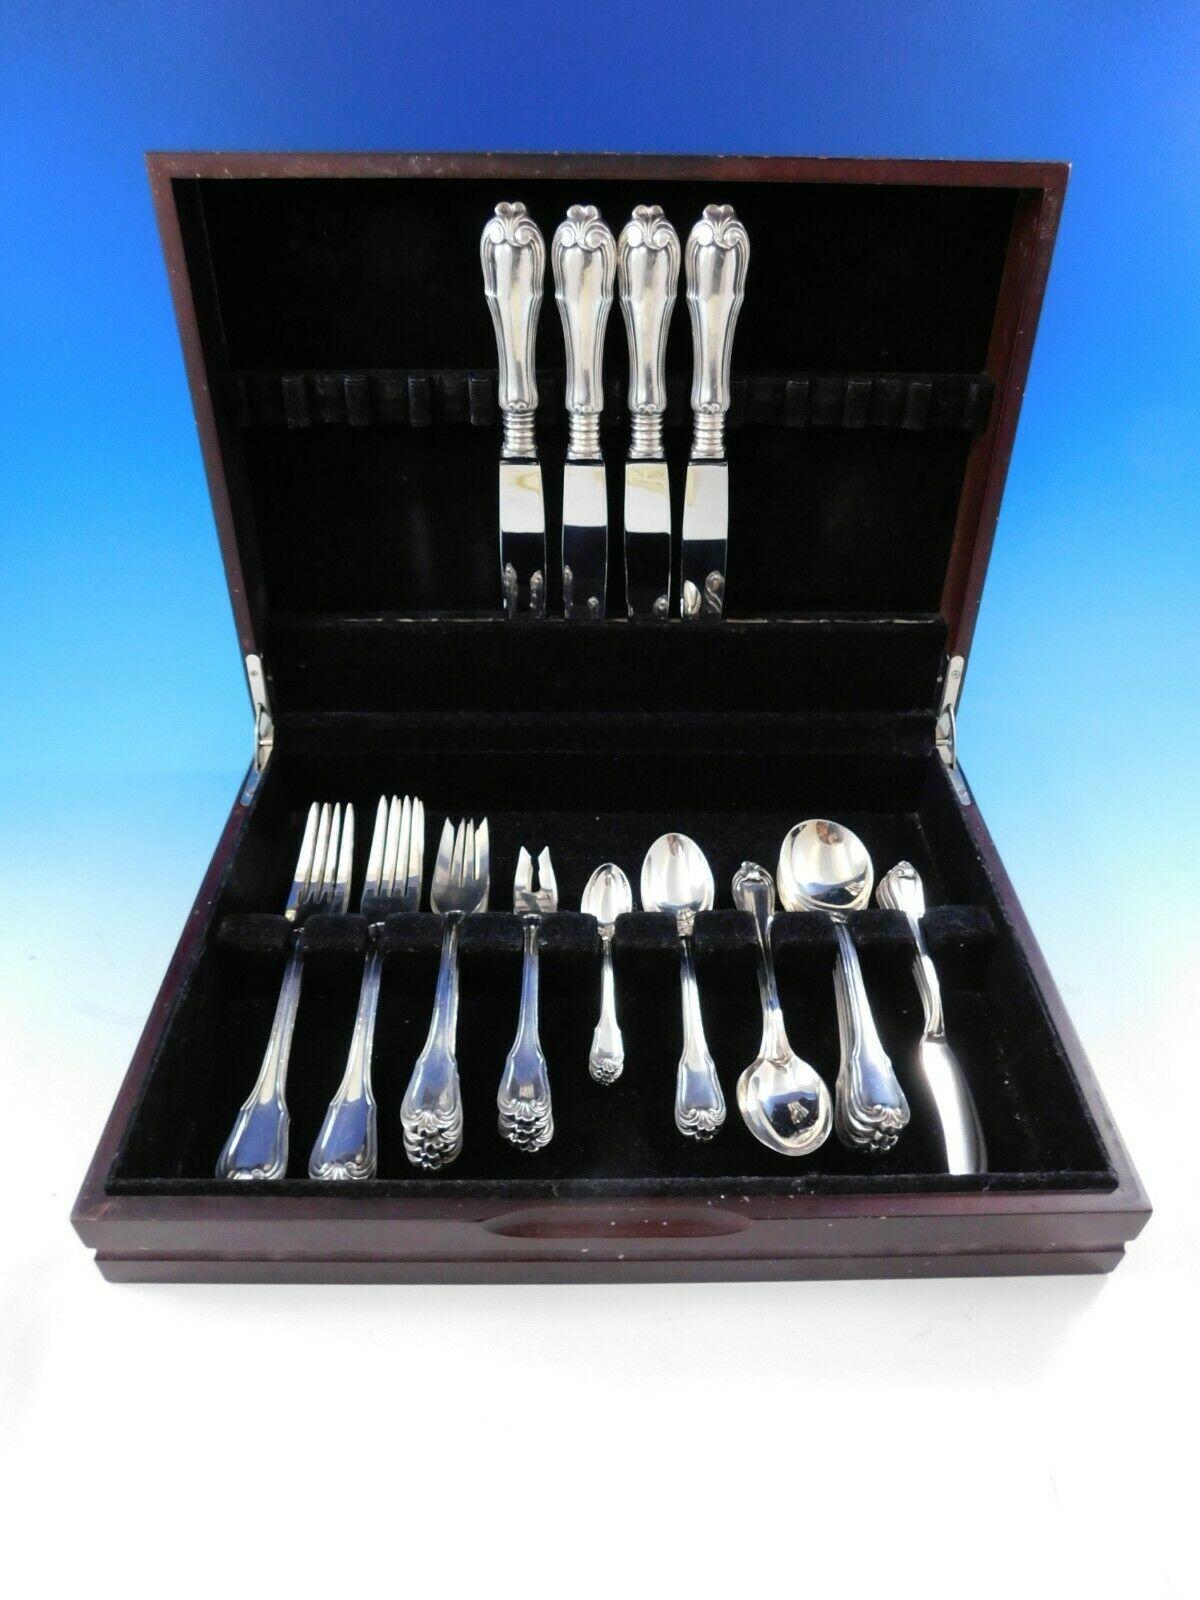 Superb Borgia by Buccellati sterling silver flatware set - 32 pieces. This set includes:

4 dinner knives, 9 3/4